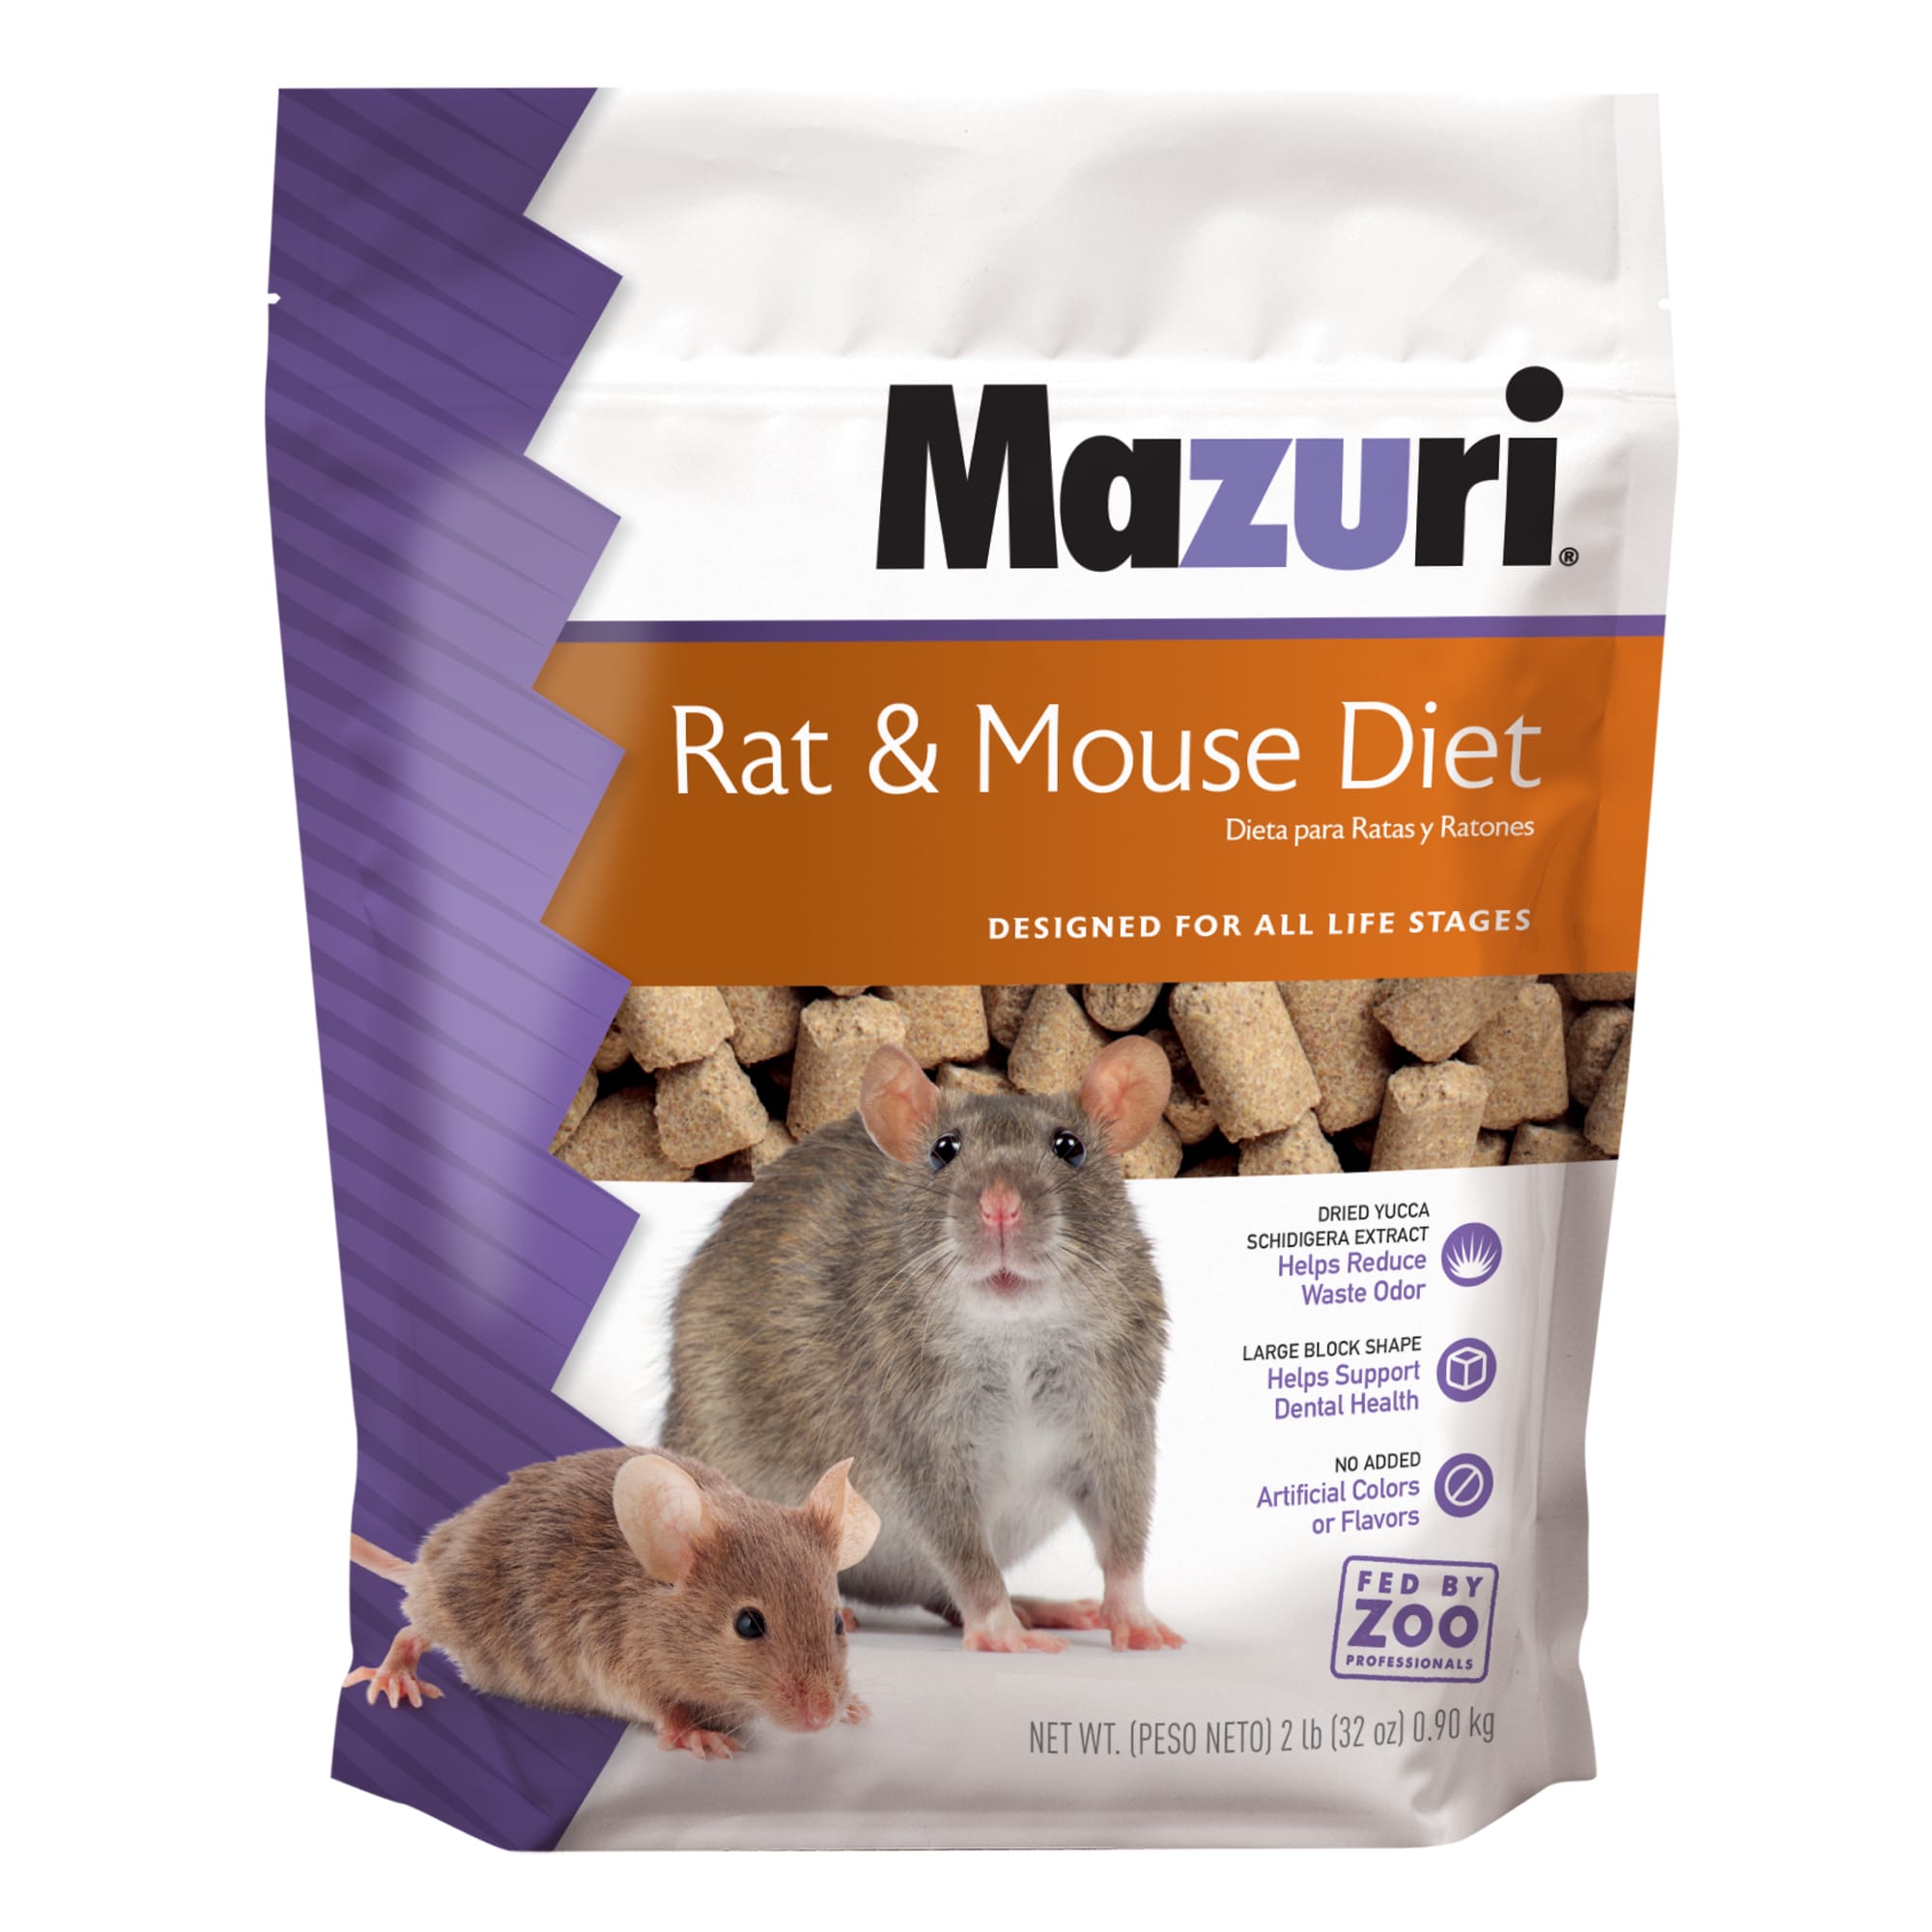 mouse products